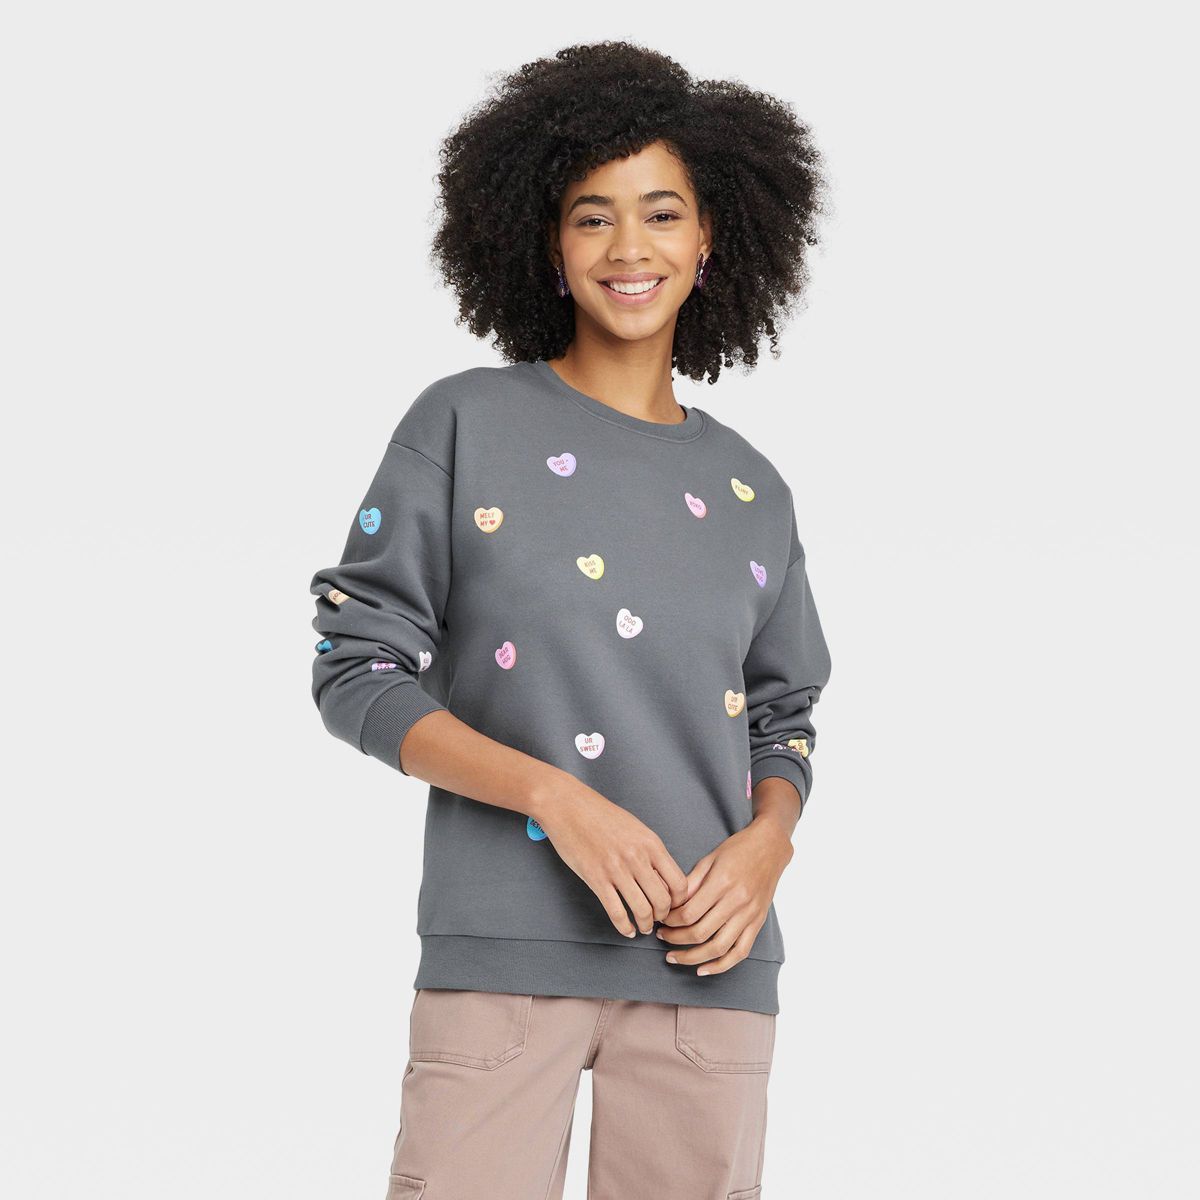 Shop this collection | Target